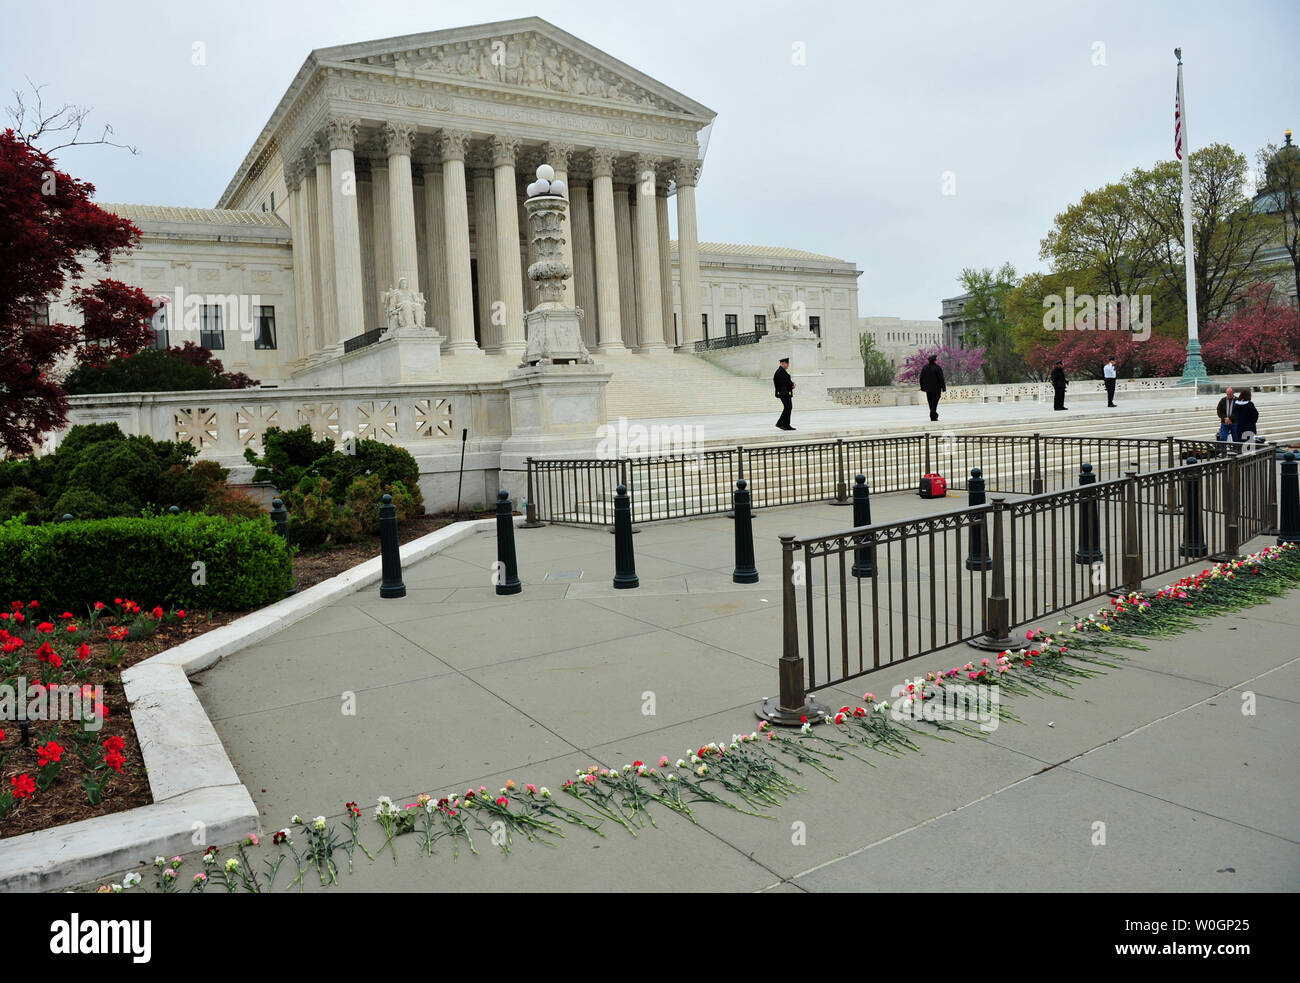 Flowers circle the United States Supreme Court during a rally against abortion a day before the Court will take up arguments on the constitutionality of President Obama's health care reform bill, in Washington, D.C. on March 25, 2012.   UPI/Kevin Dietsch Stock Photo